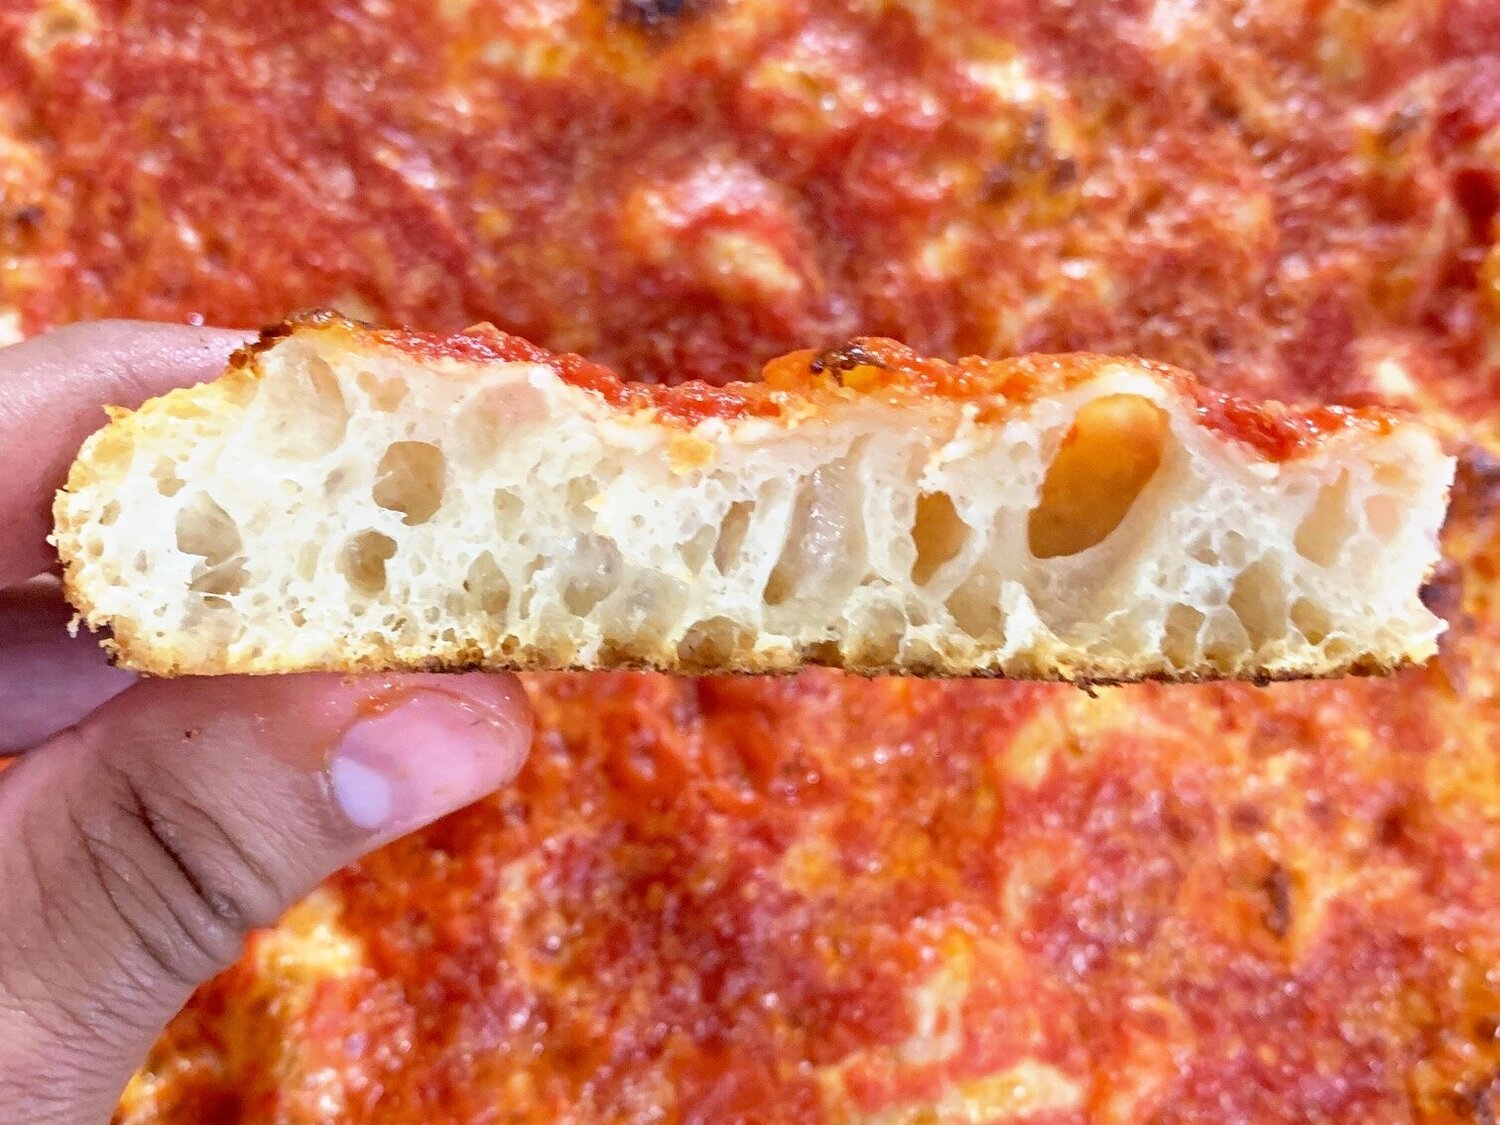 What is Sicilian Pizza? - The Sauce